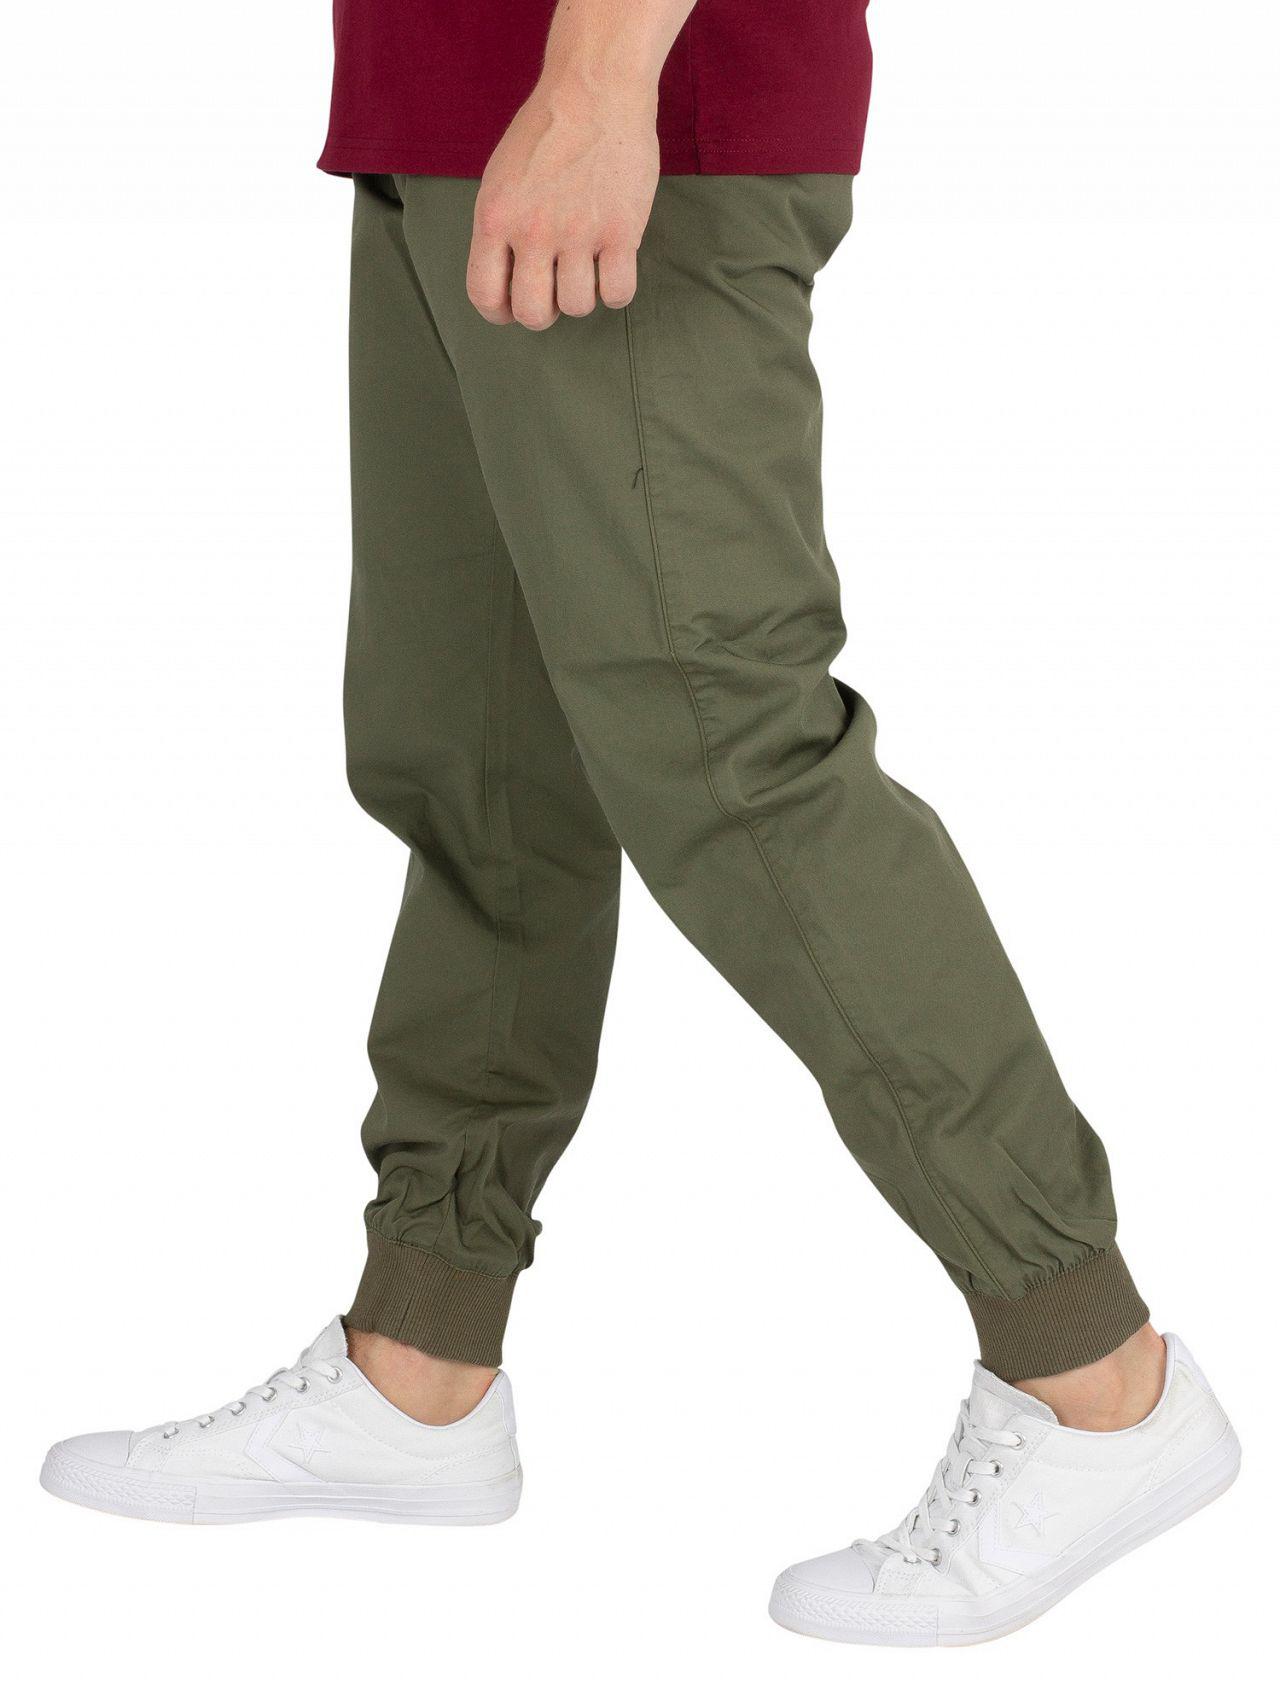 Carhartt WIP Cotton Rover Green Rinsed Madison Joggers for Men - Lyst